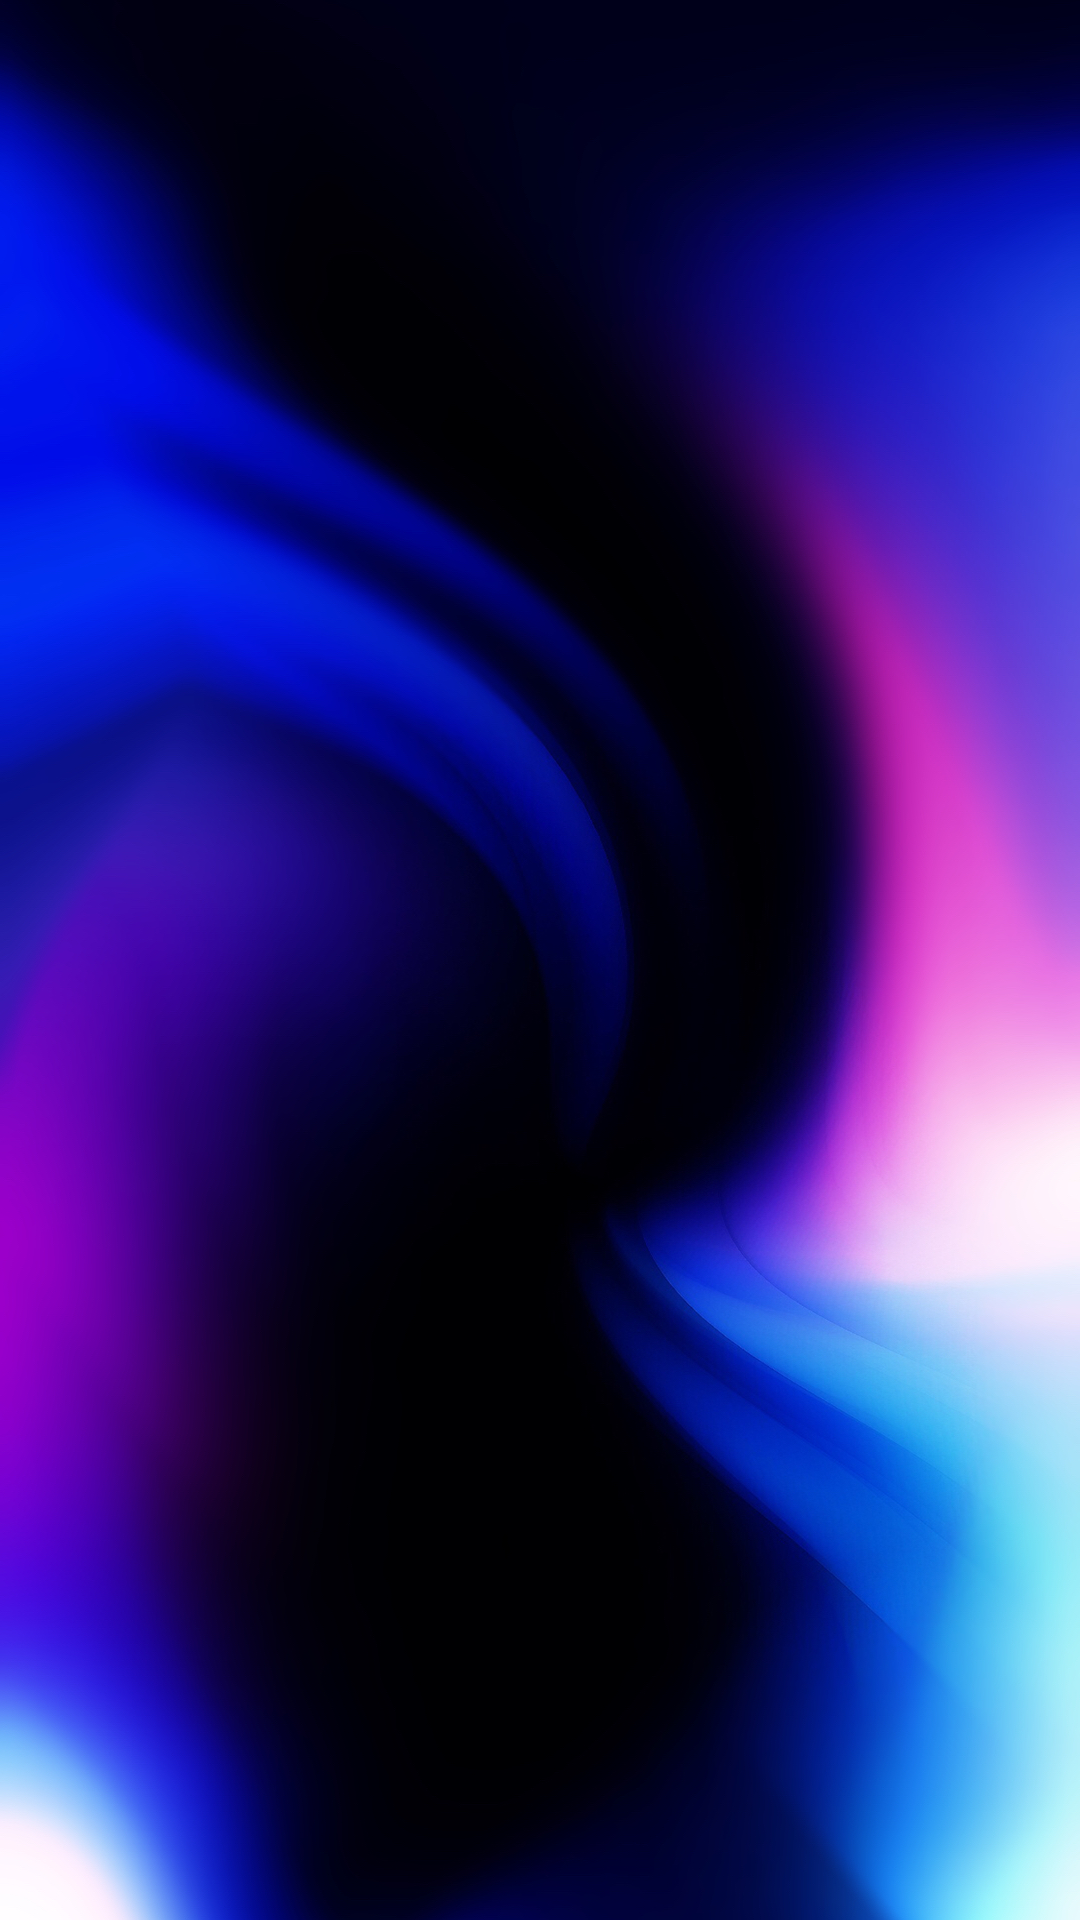 abstract iphone wallpaper,blue,violet,purple,electric blue,light